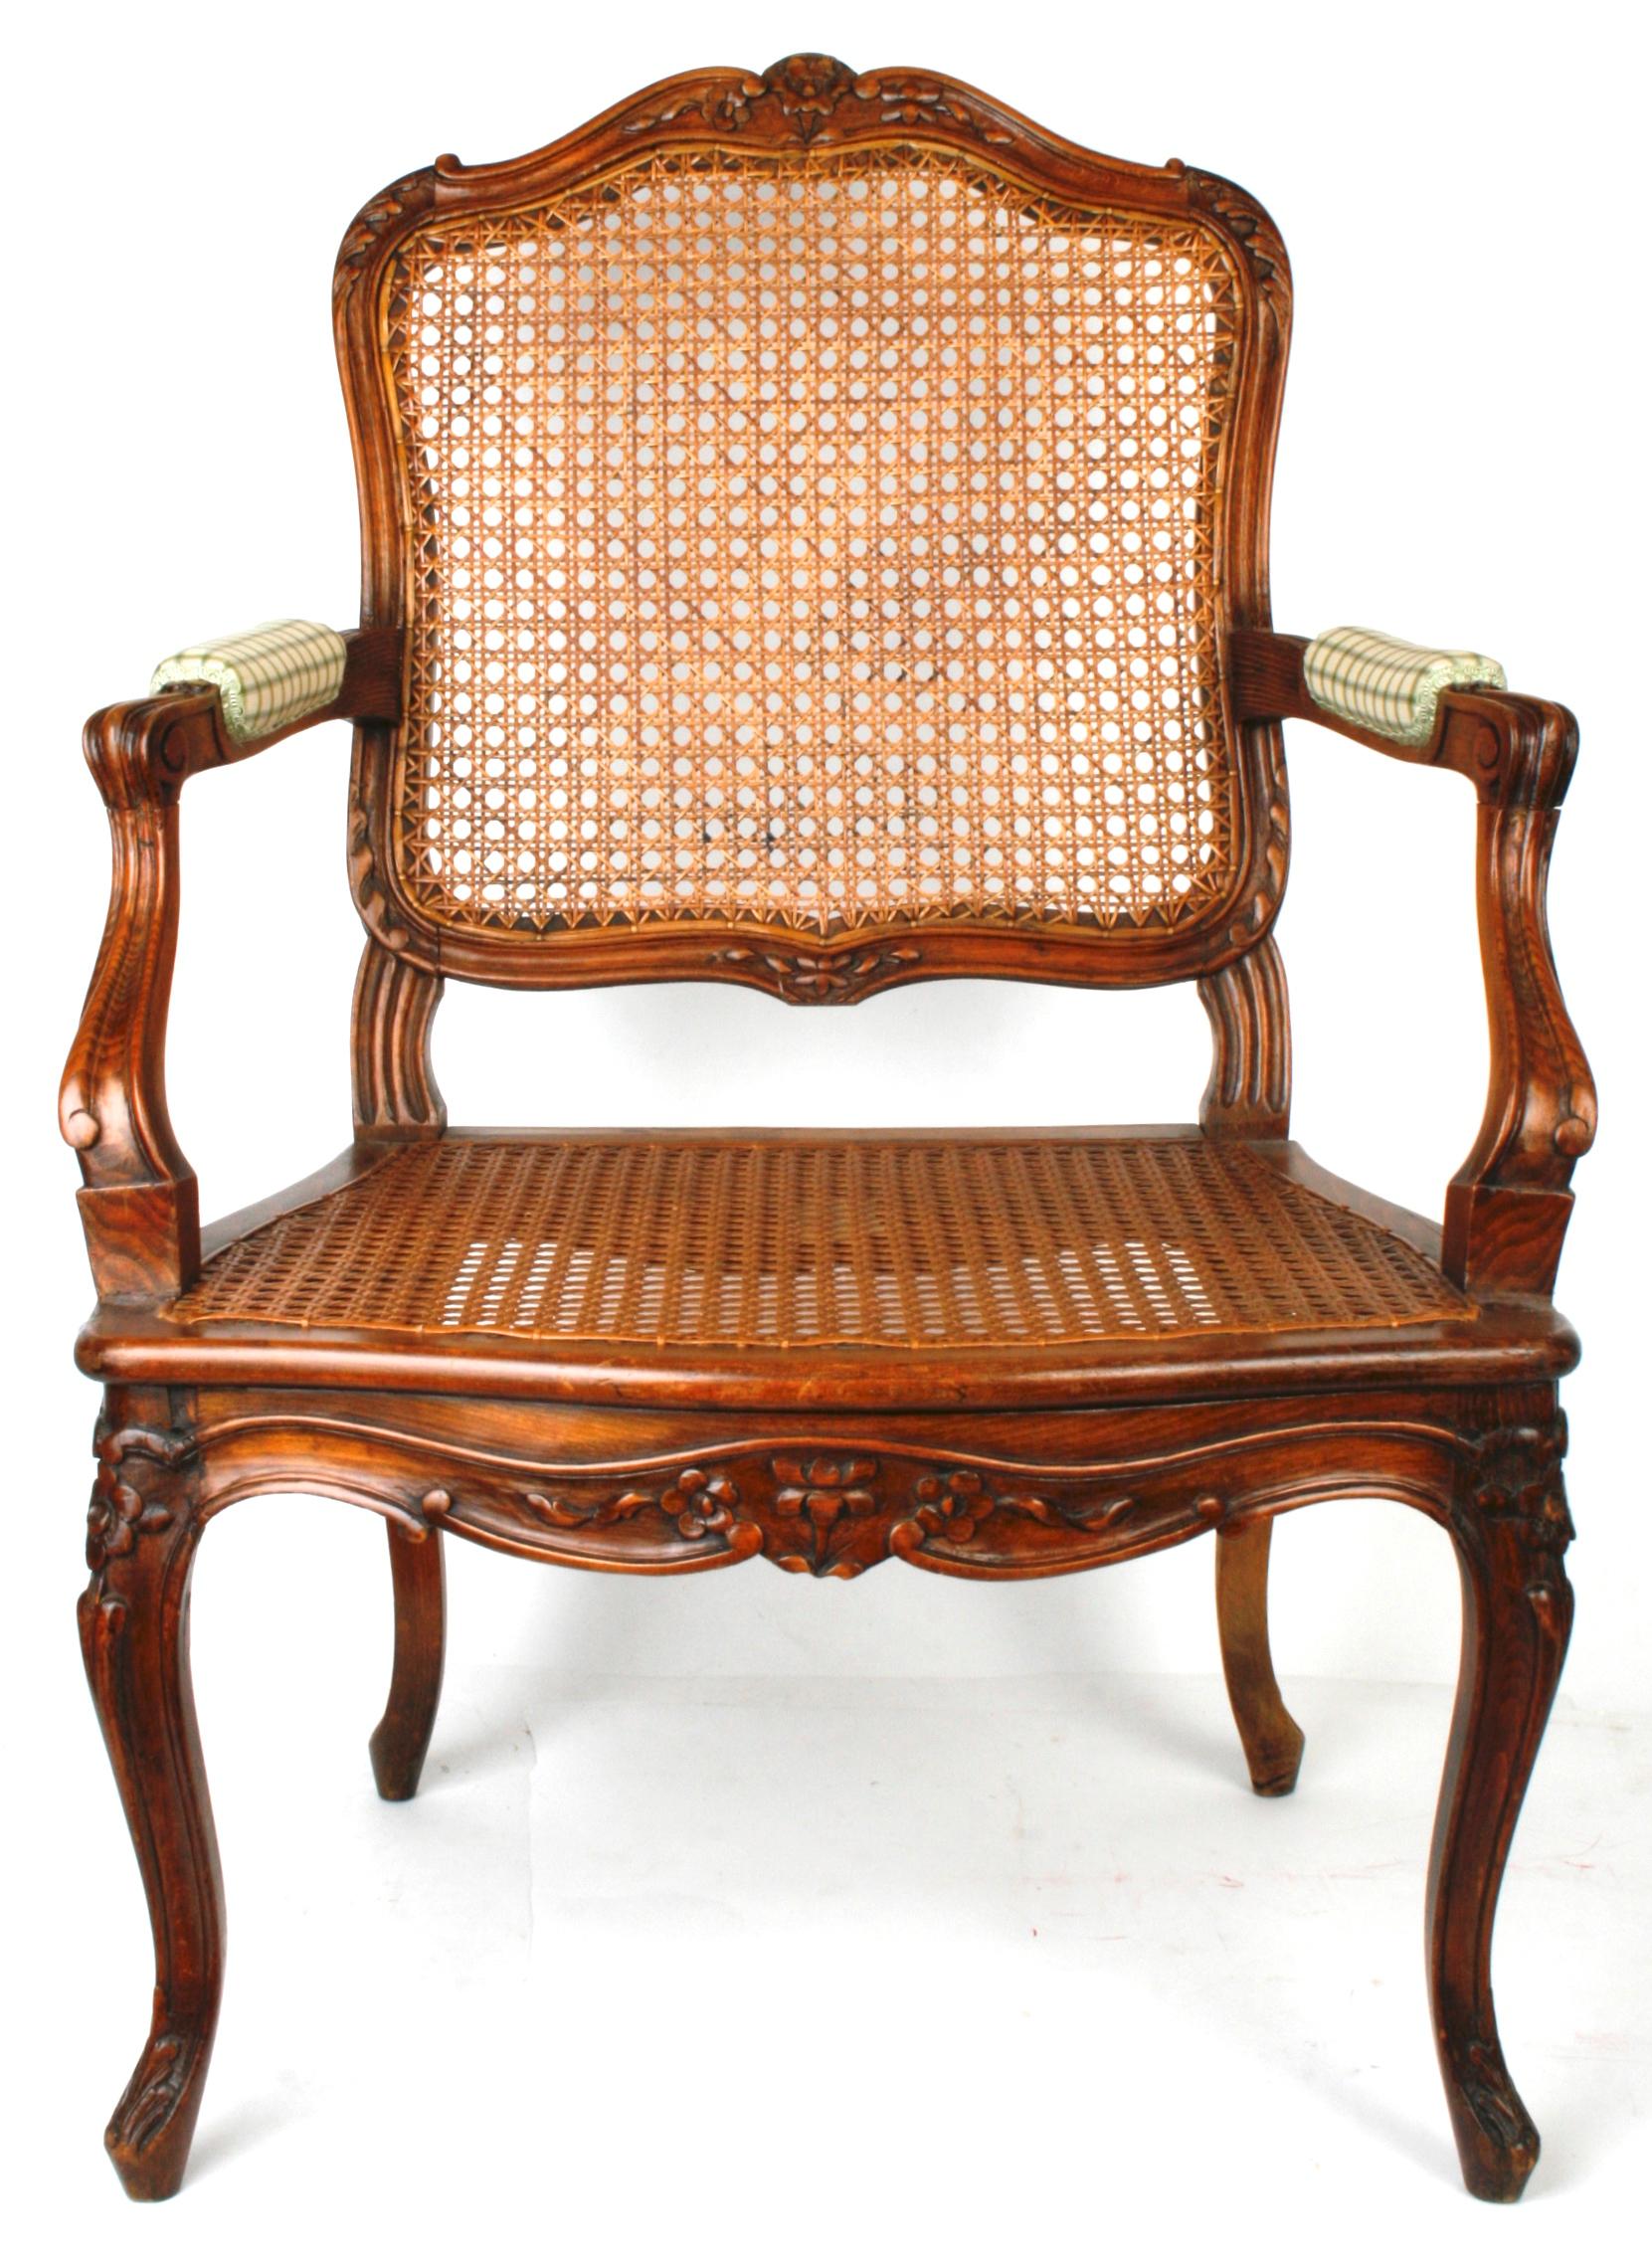 An assembled pair of Louis XV style French carved walnut dining chairs with hand-caned seats and backs with upholstered arms. The frames are constructed in the 18th century Louis XV manner with pinned mortise and tenons and have a scrolled floral